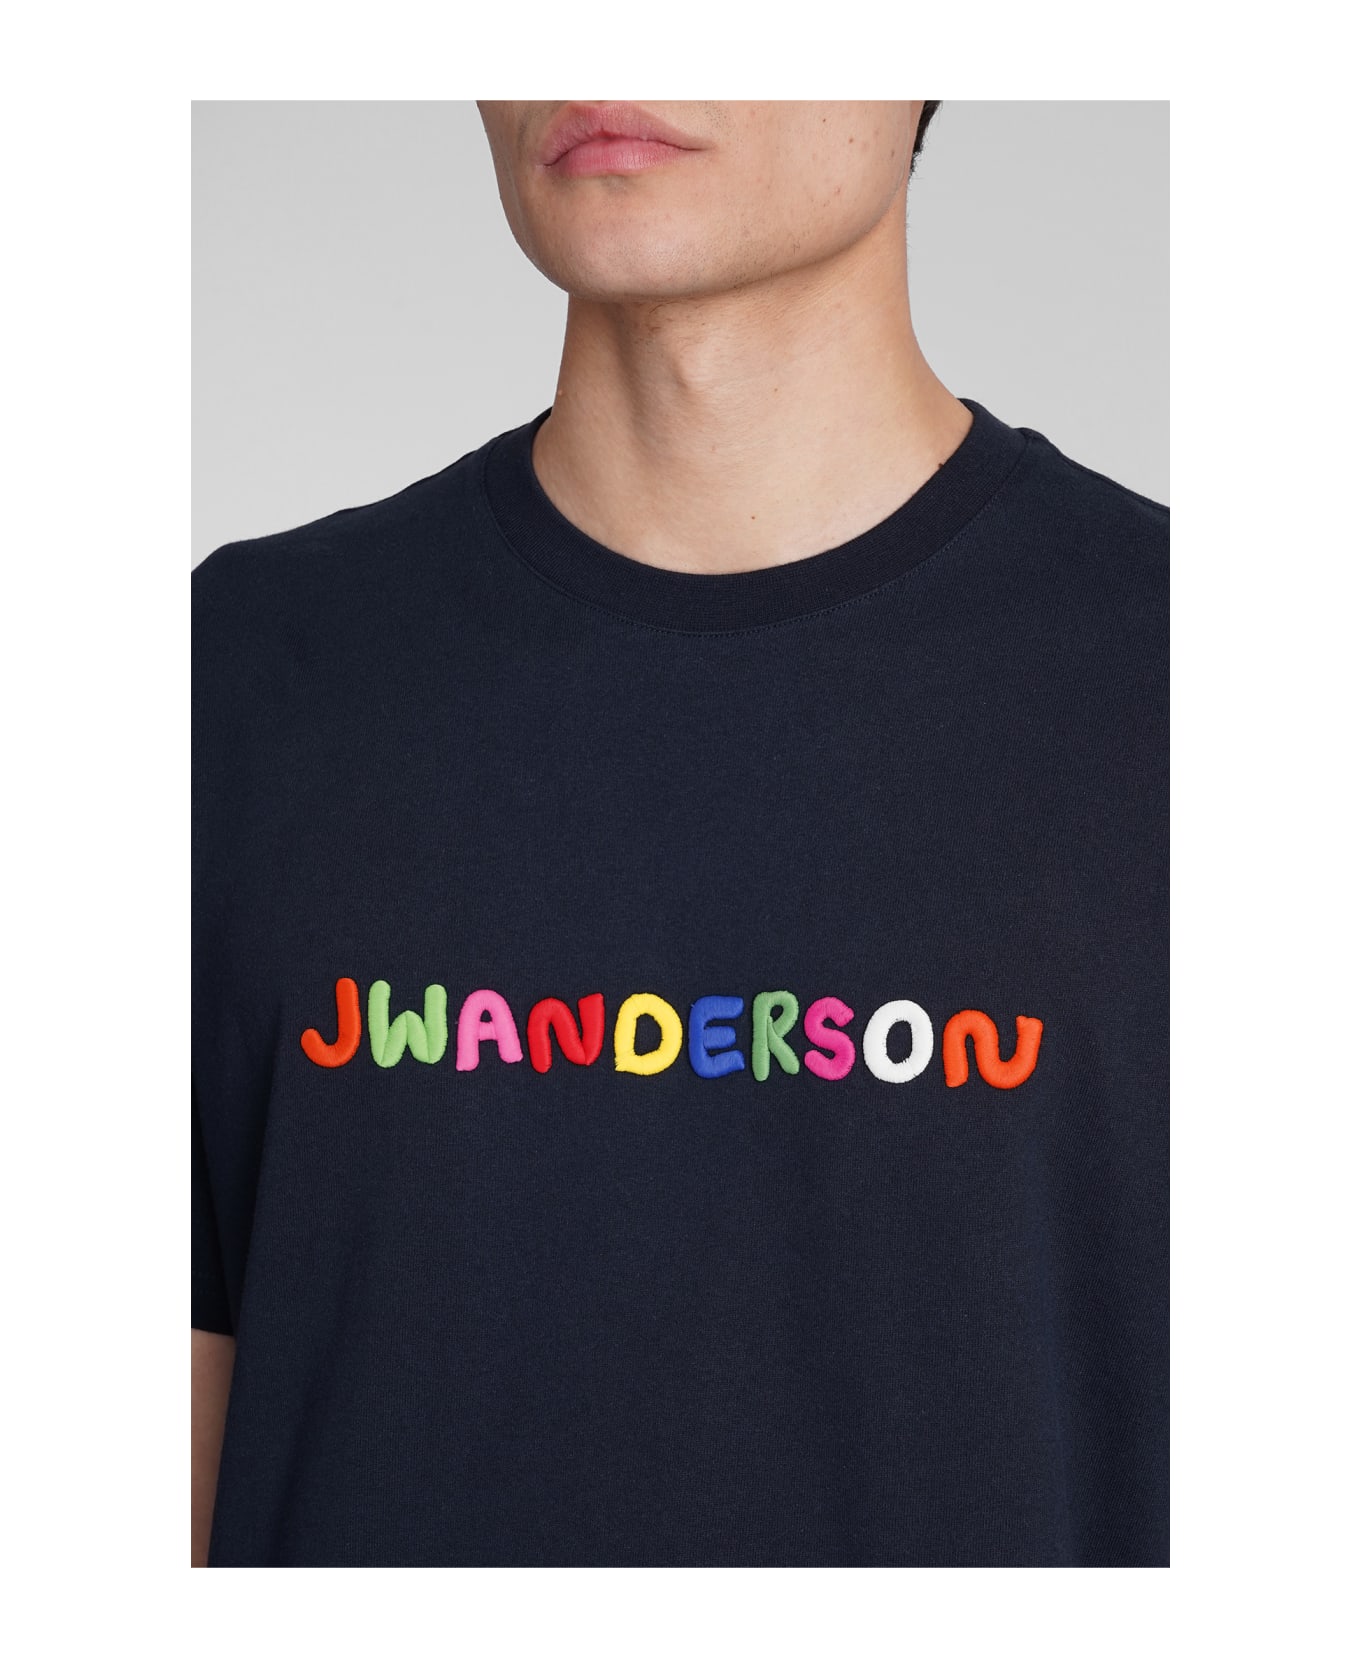 J.W. Anderson T-shirt In Blue Cotton - Navy